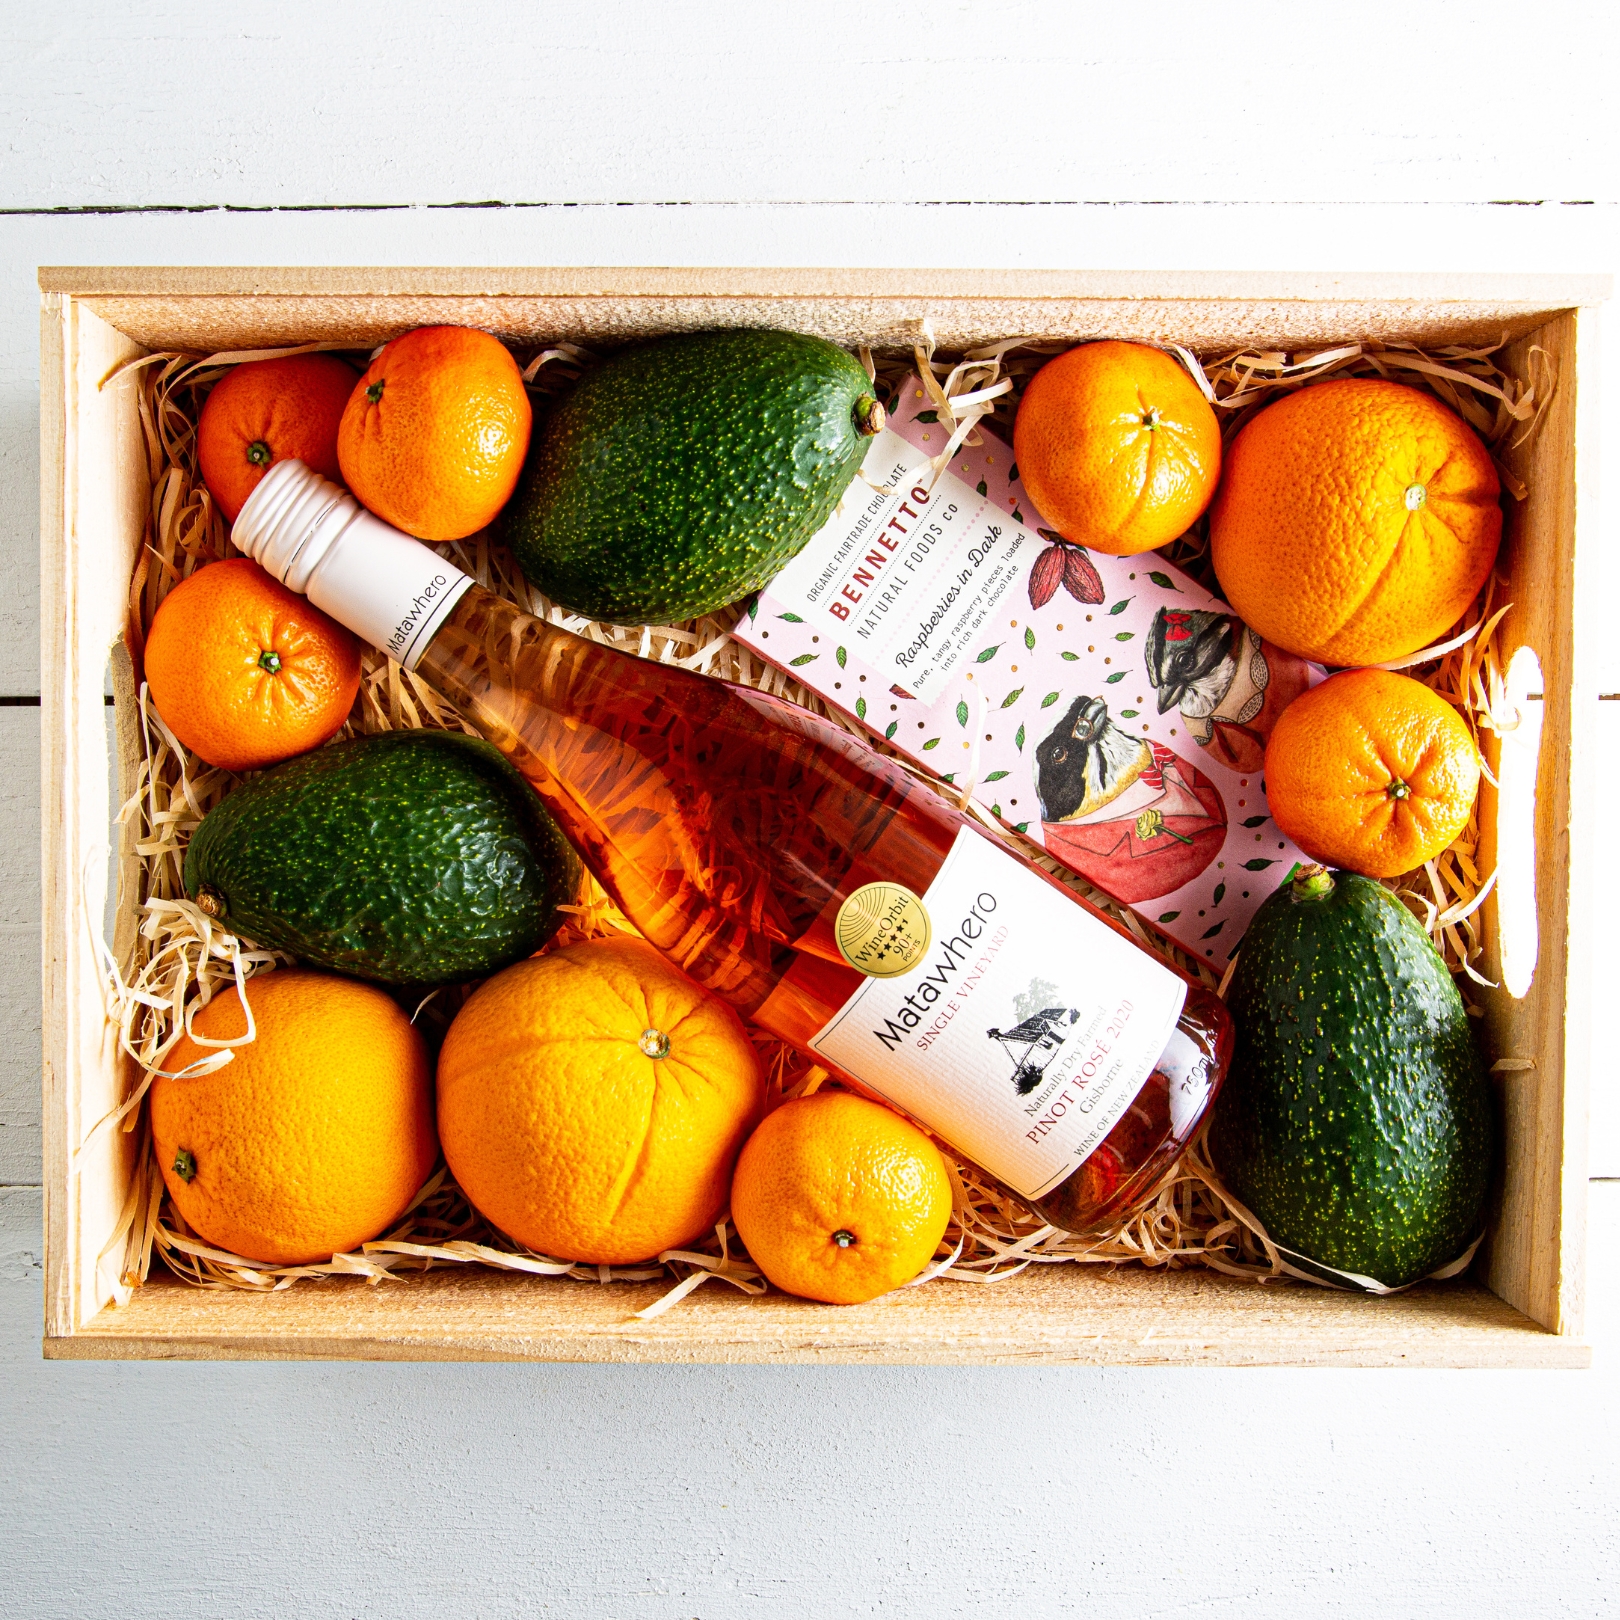 Buy The Rose - Rosé Wine, Chocolate & Fruit Gift Box  Online NZ - Twisted Citrus